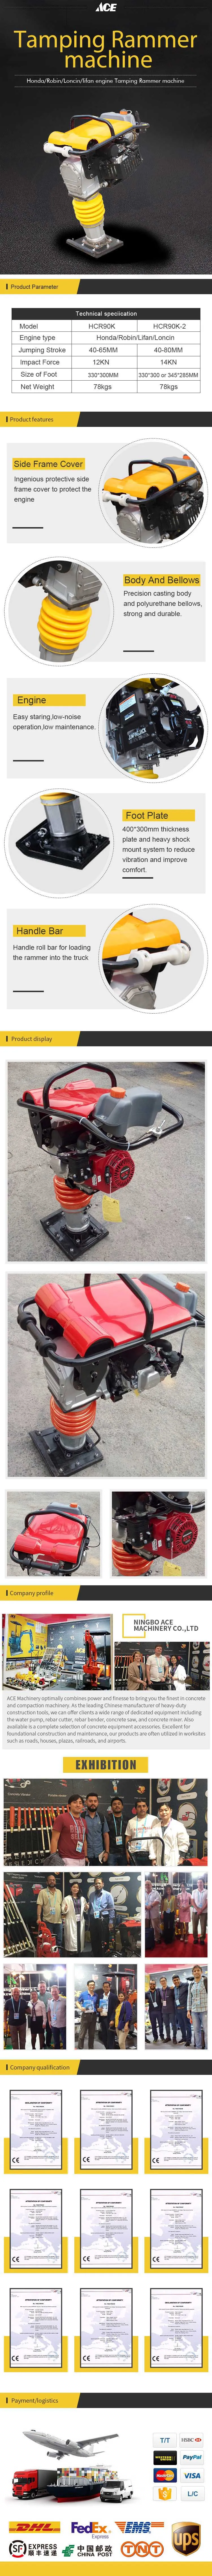 High Quality Vibratory Tamping Rammer China Factory Price